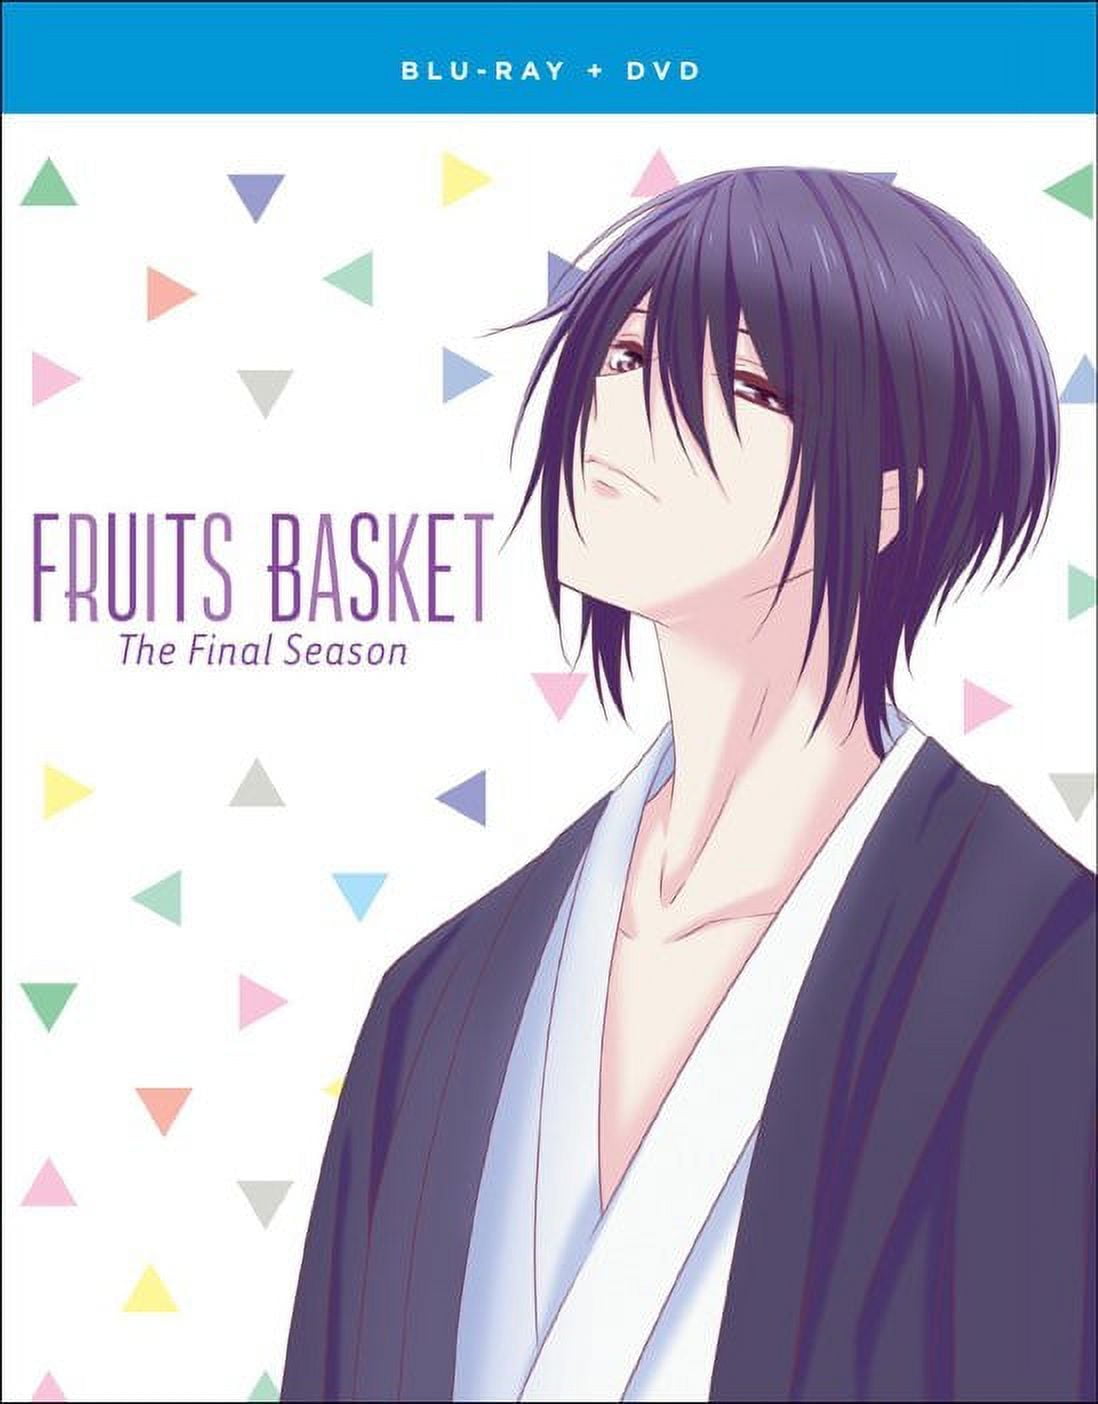 5 Anime Recommendations To Watch After Fruits Basket Finale